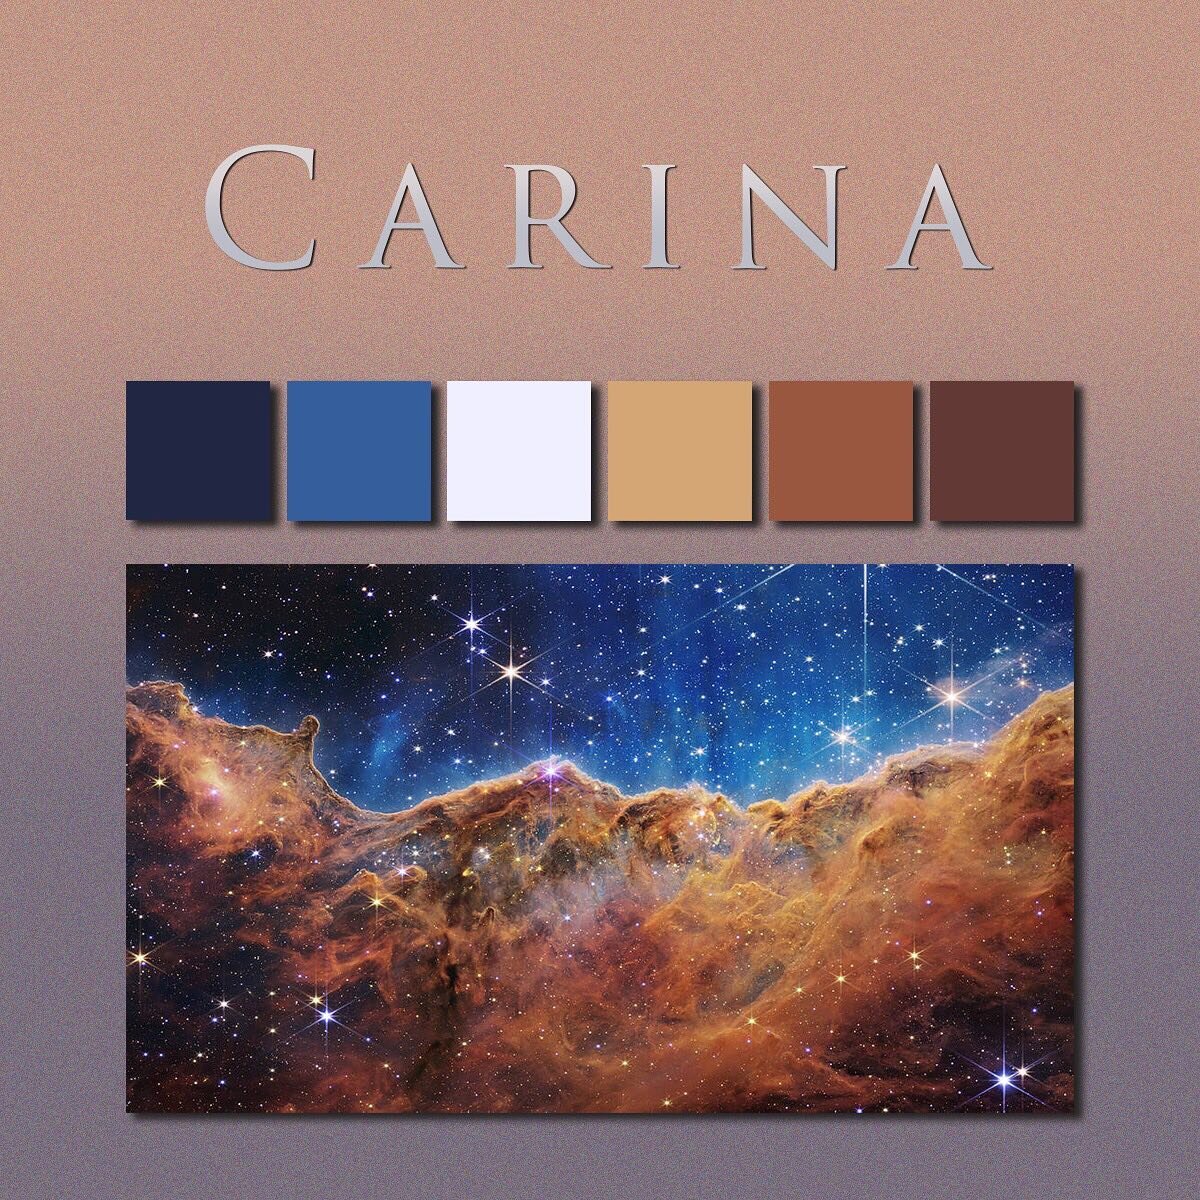 On the latest edition of &ldquo;Things I can&rsquo;t stop looking at&rdquo;&hellip;.
.
.
.
.
.
.

#colorpalette #carinanebula #jwst #nasa #designinspiration #colorpaletteinspiration #graphicdesigninspiration
#webdesigninspiration #websitedesign